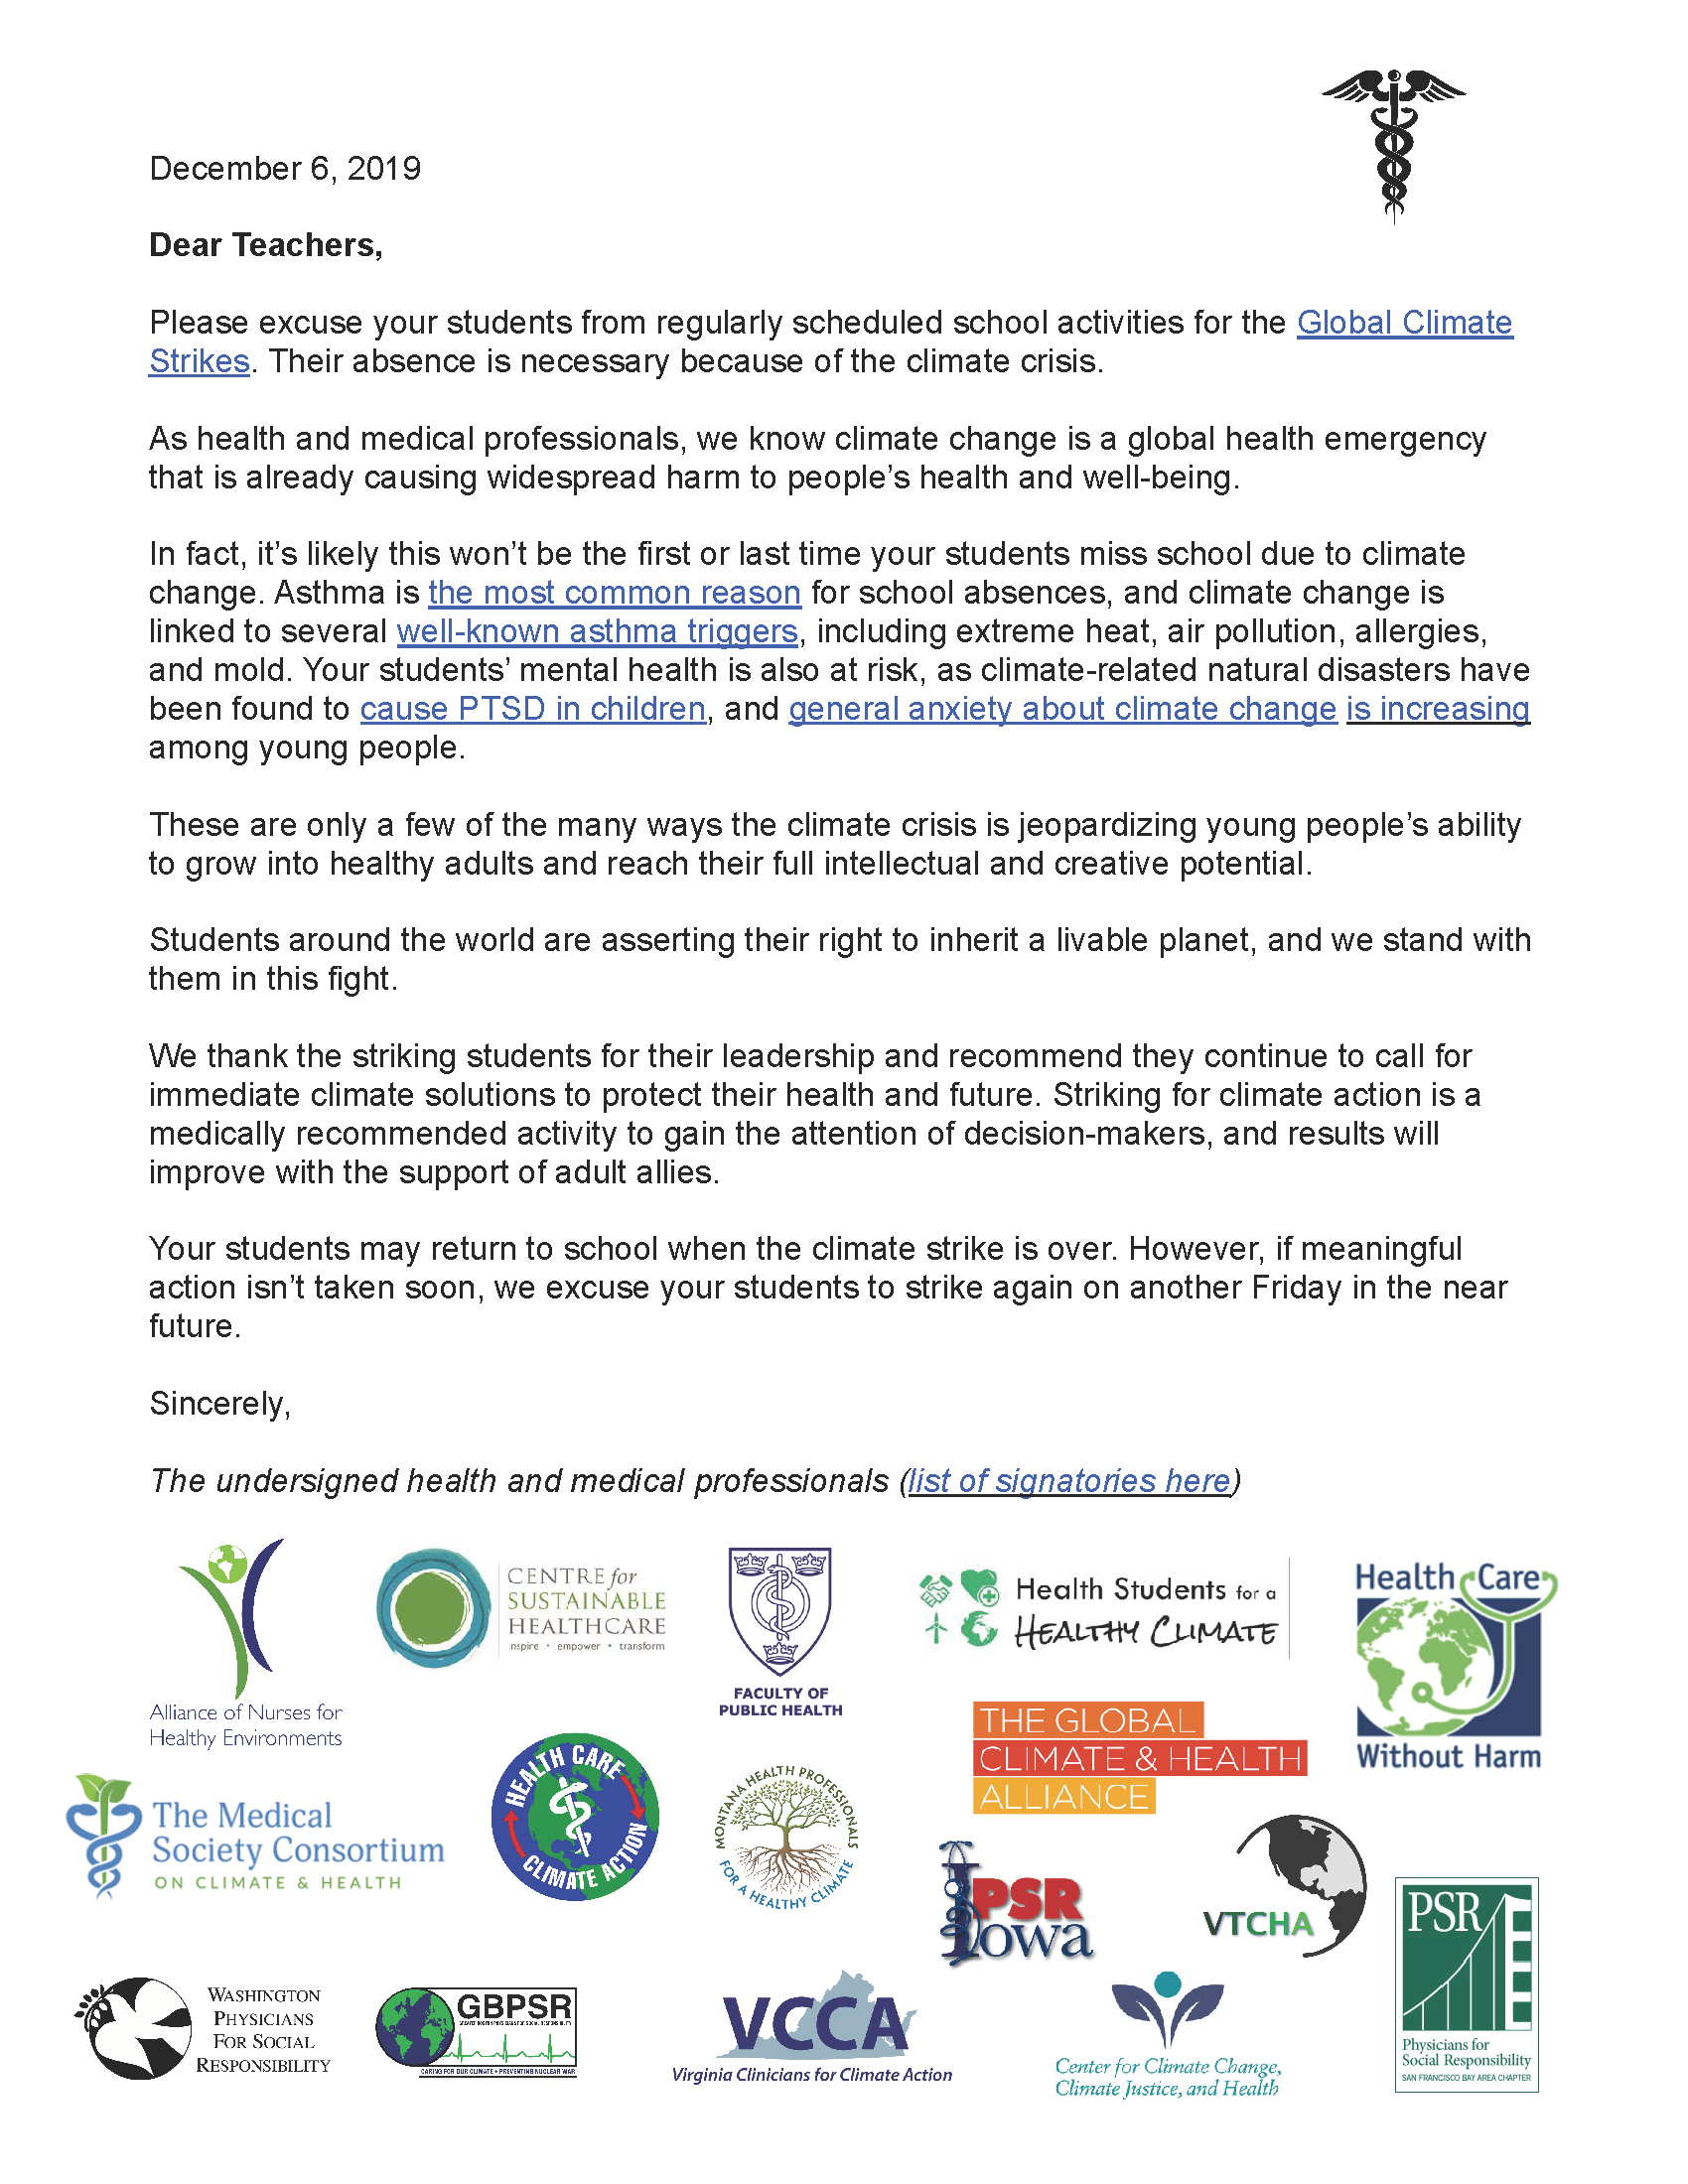 Medical excuse letter for student climate strikers